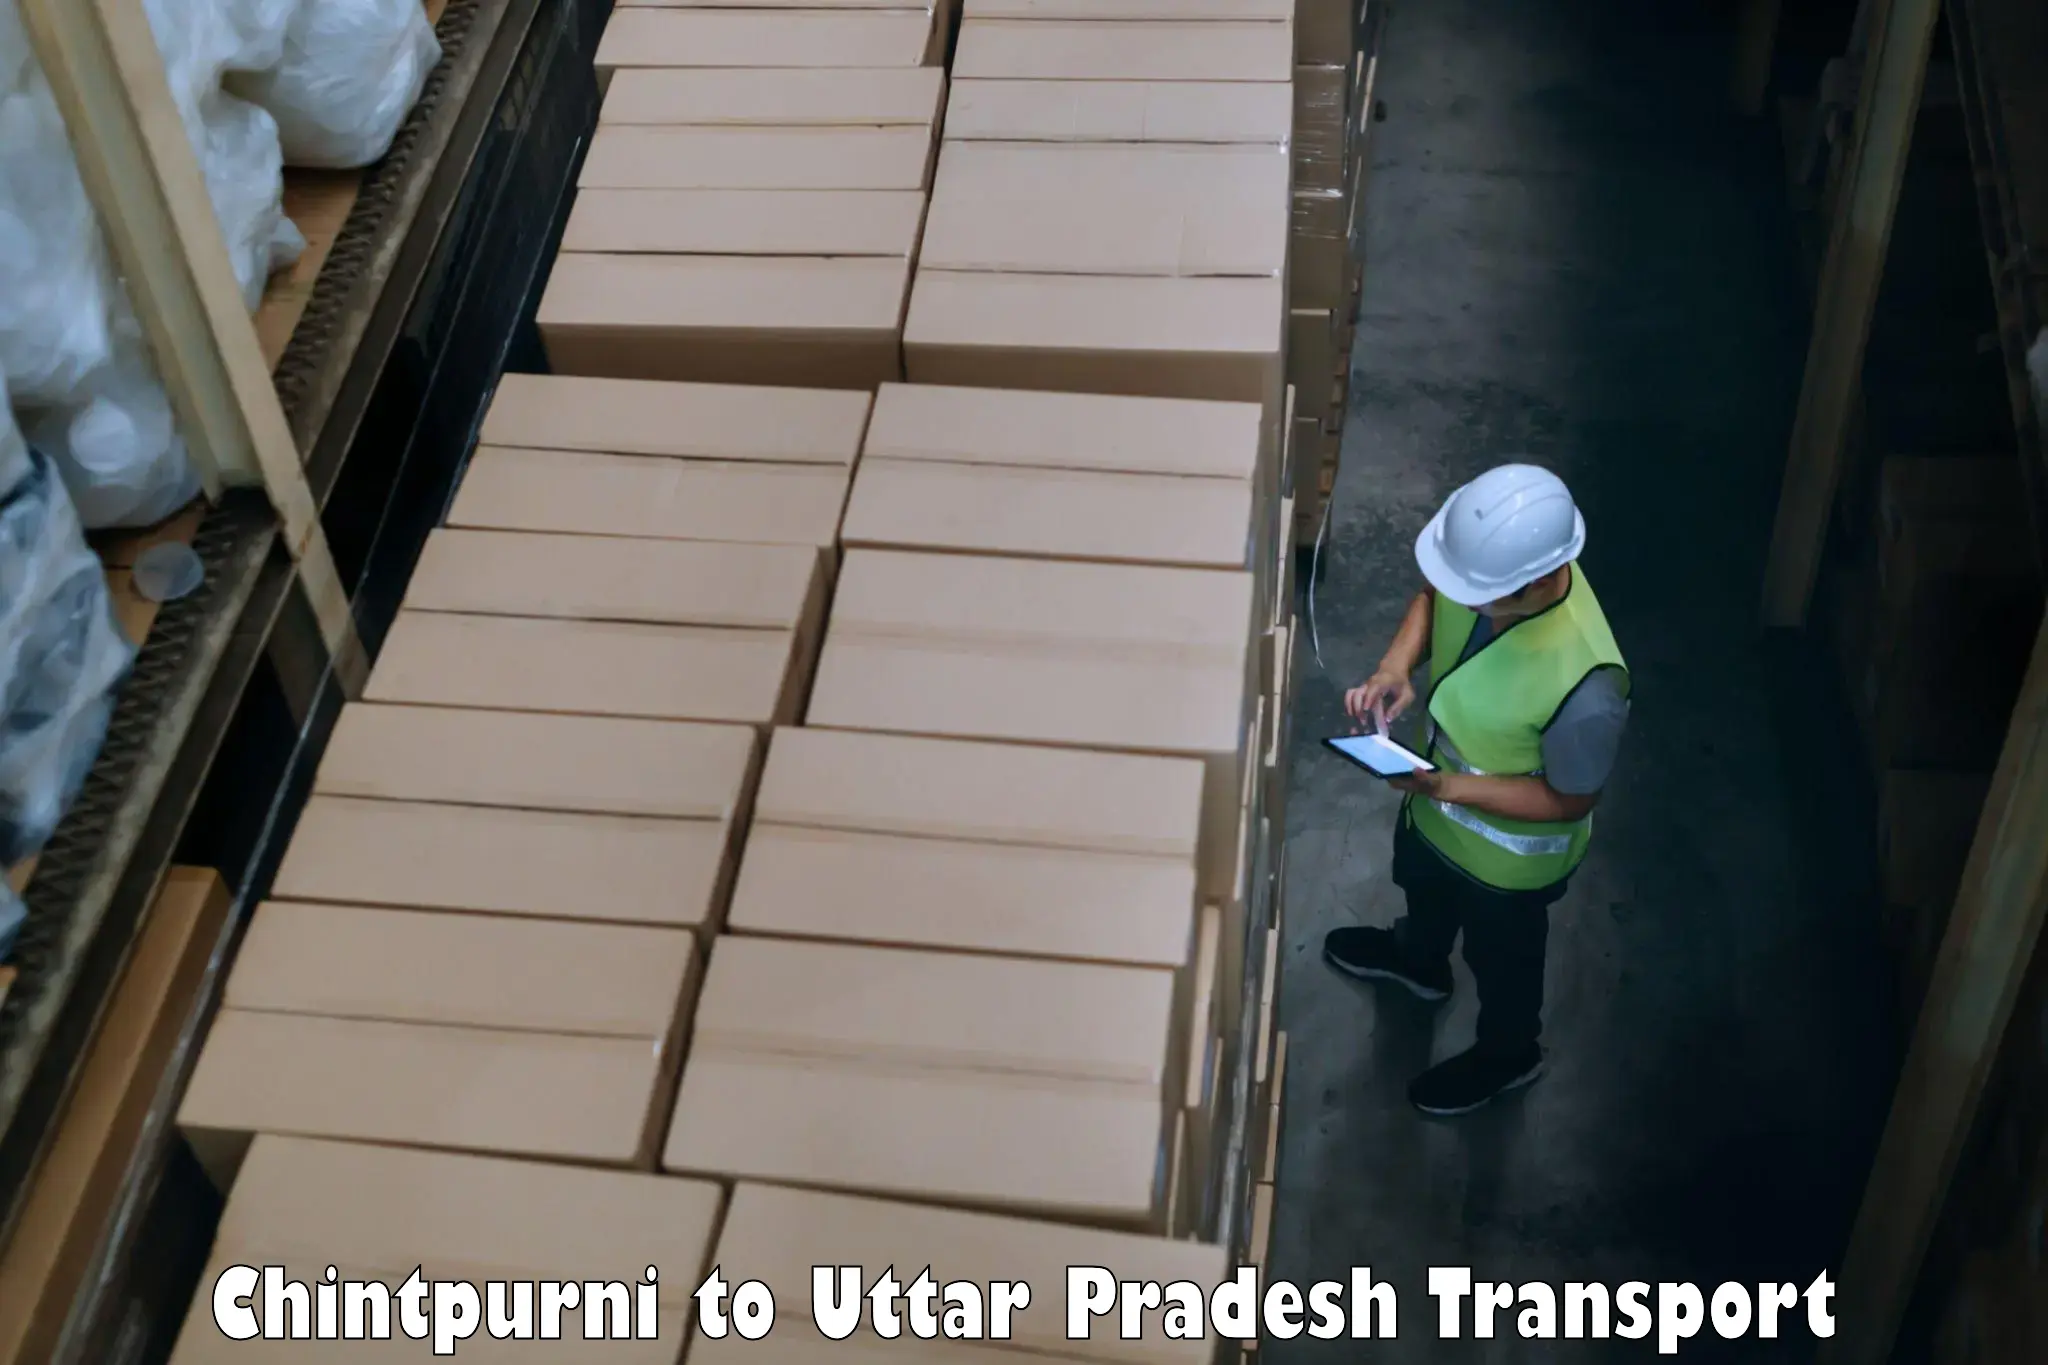 Container transport service Chintpurni to Harpalpur